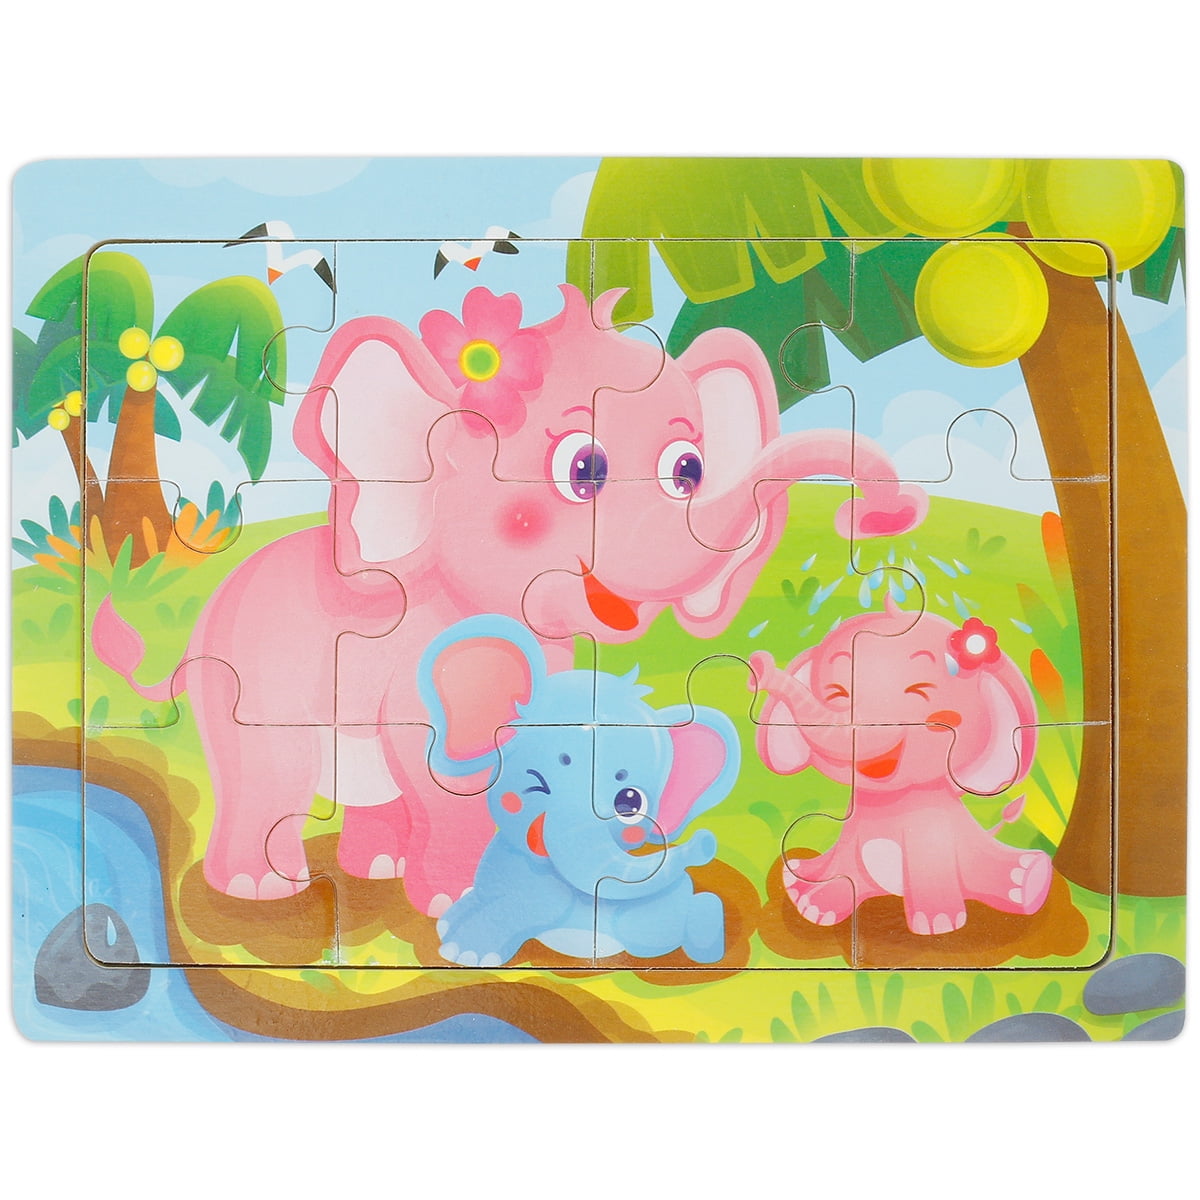 Zoo Animal Wooden Jigsaw Puzzle Toy Children Kid Baby Learning Educational Gift 